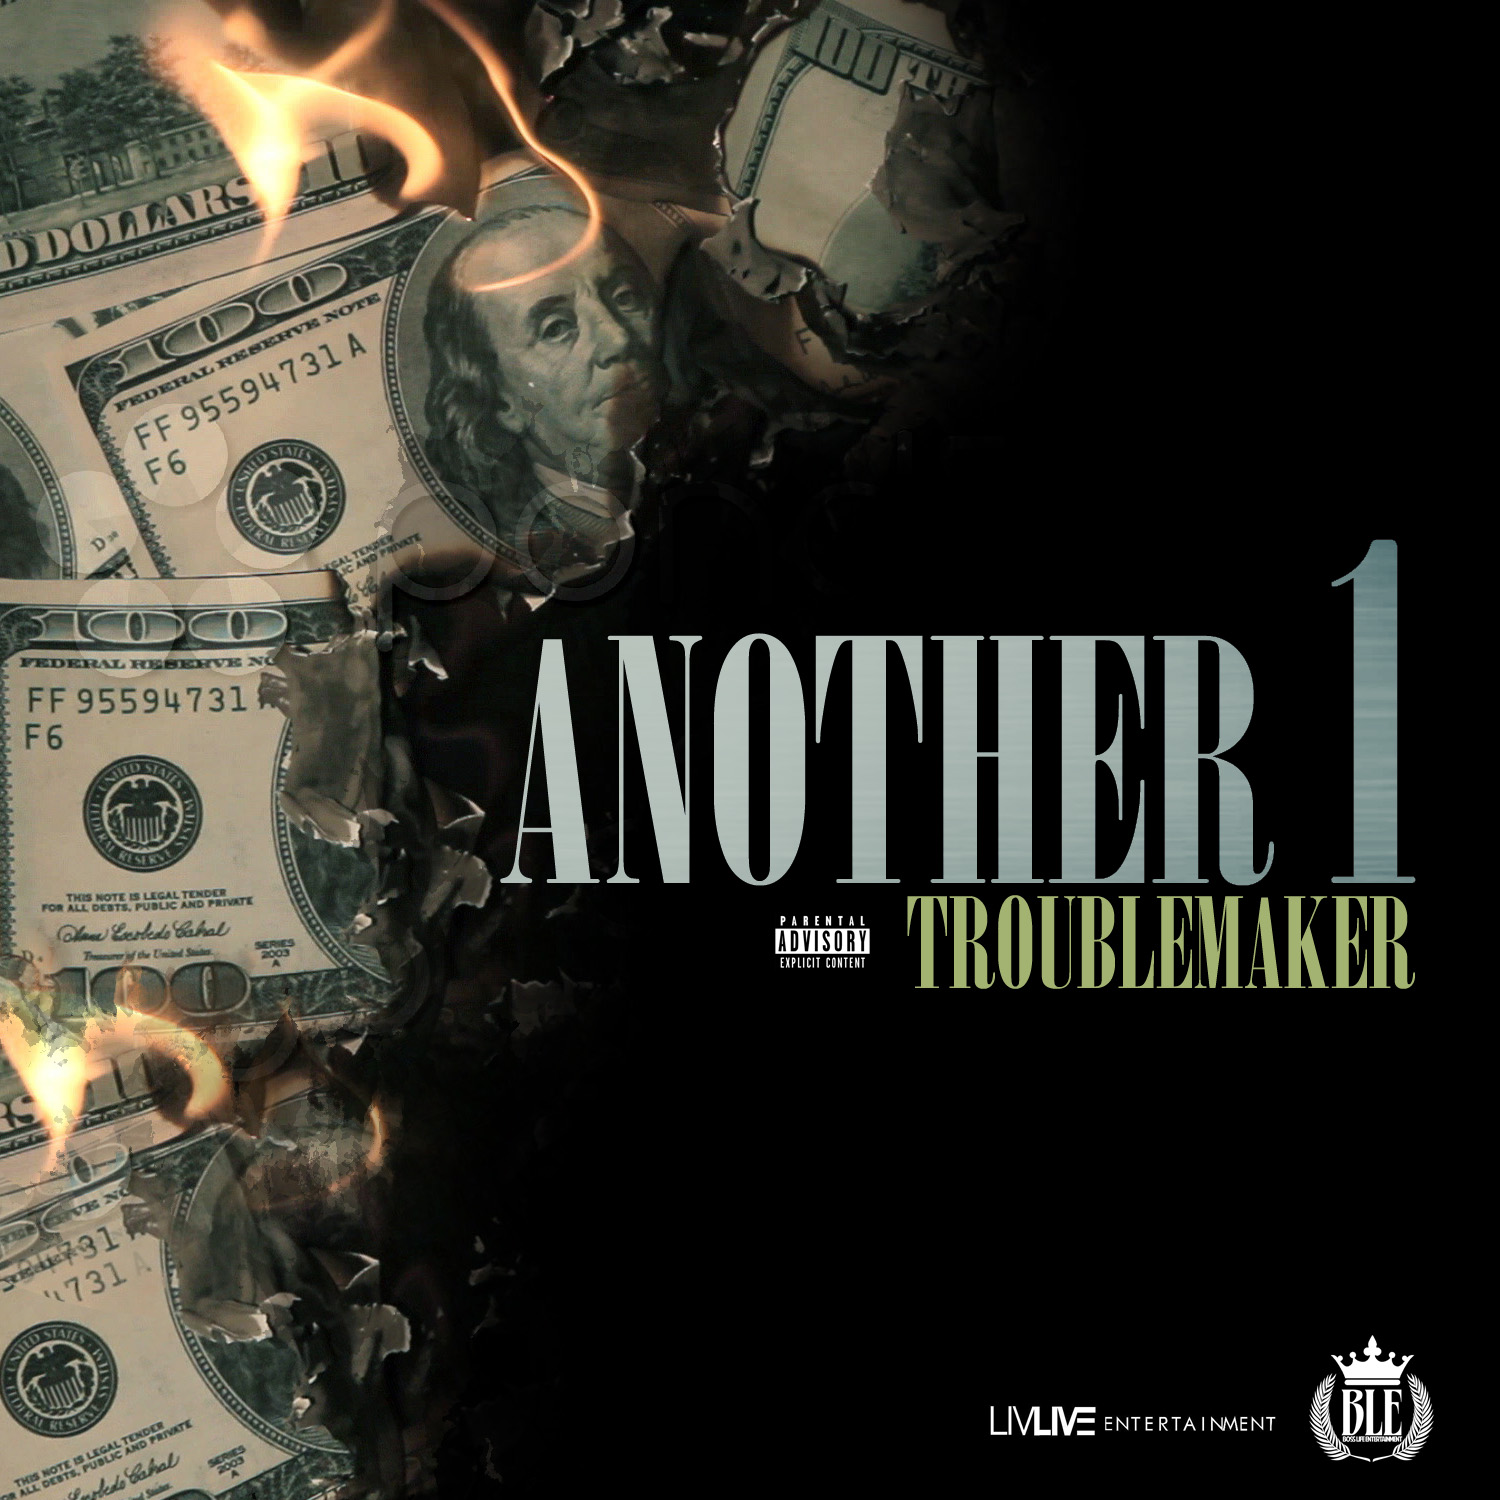 Troublemaker Dropping The New Single “Another One” | @925troublemaker